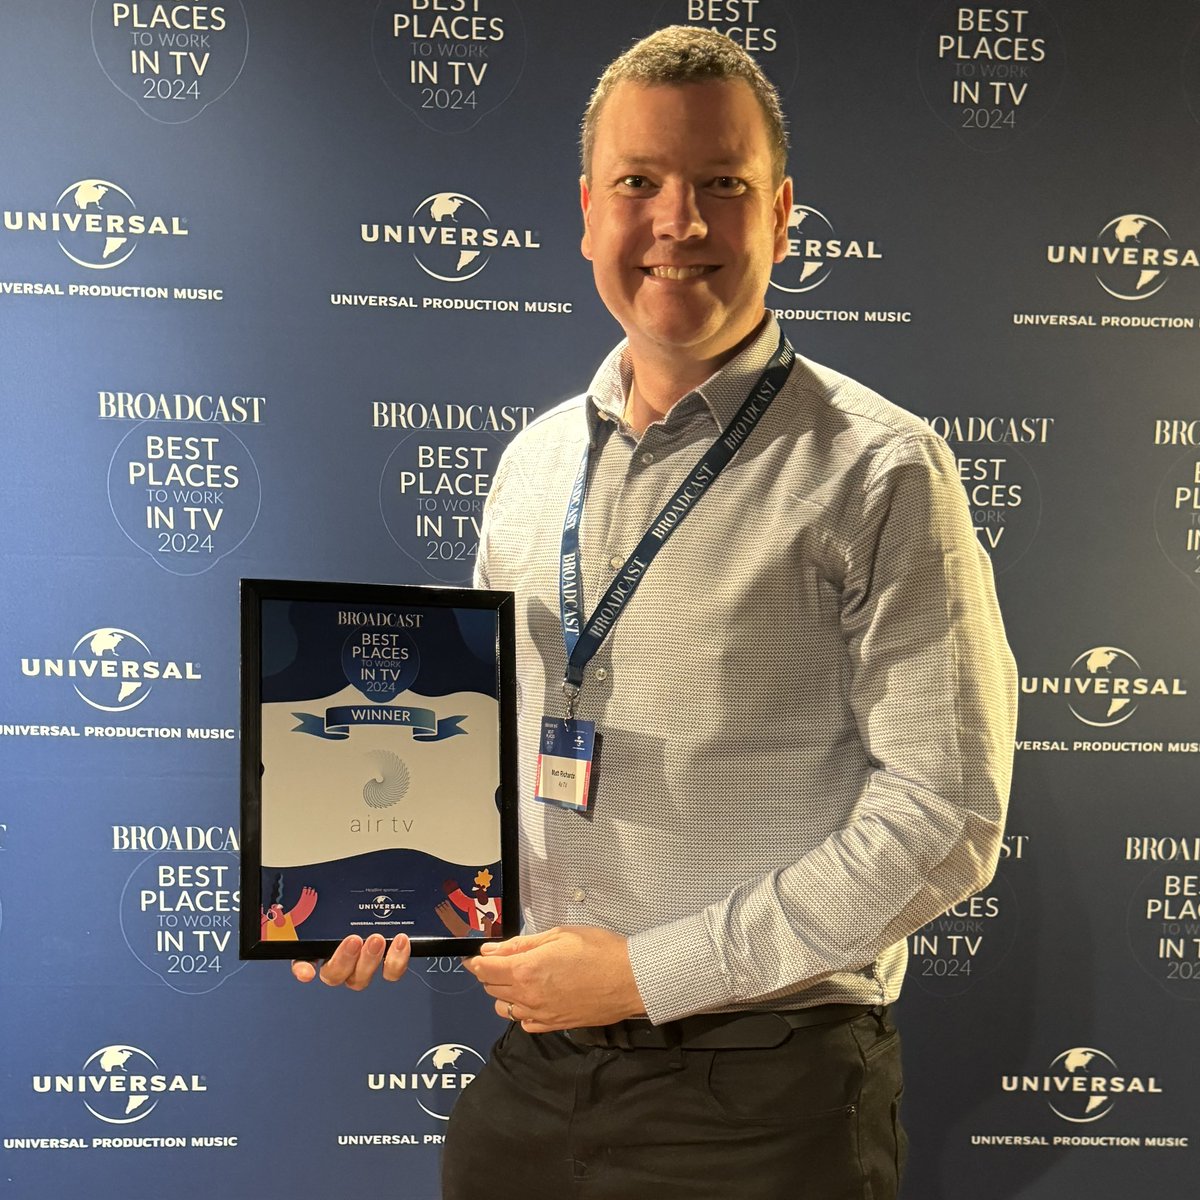 We’re really proud to have today been named as one of the best places to work in TV for 2024 by @Broadcastnow.  Huge congratulations to all the other companies we are alongside on the list, and massive thanks to our amazing team and those we work with. 
#BroadcastBPTW #BPTW2024